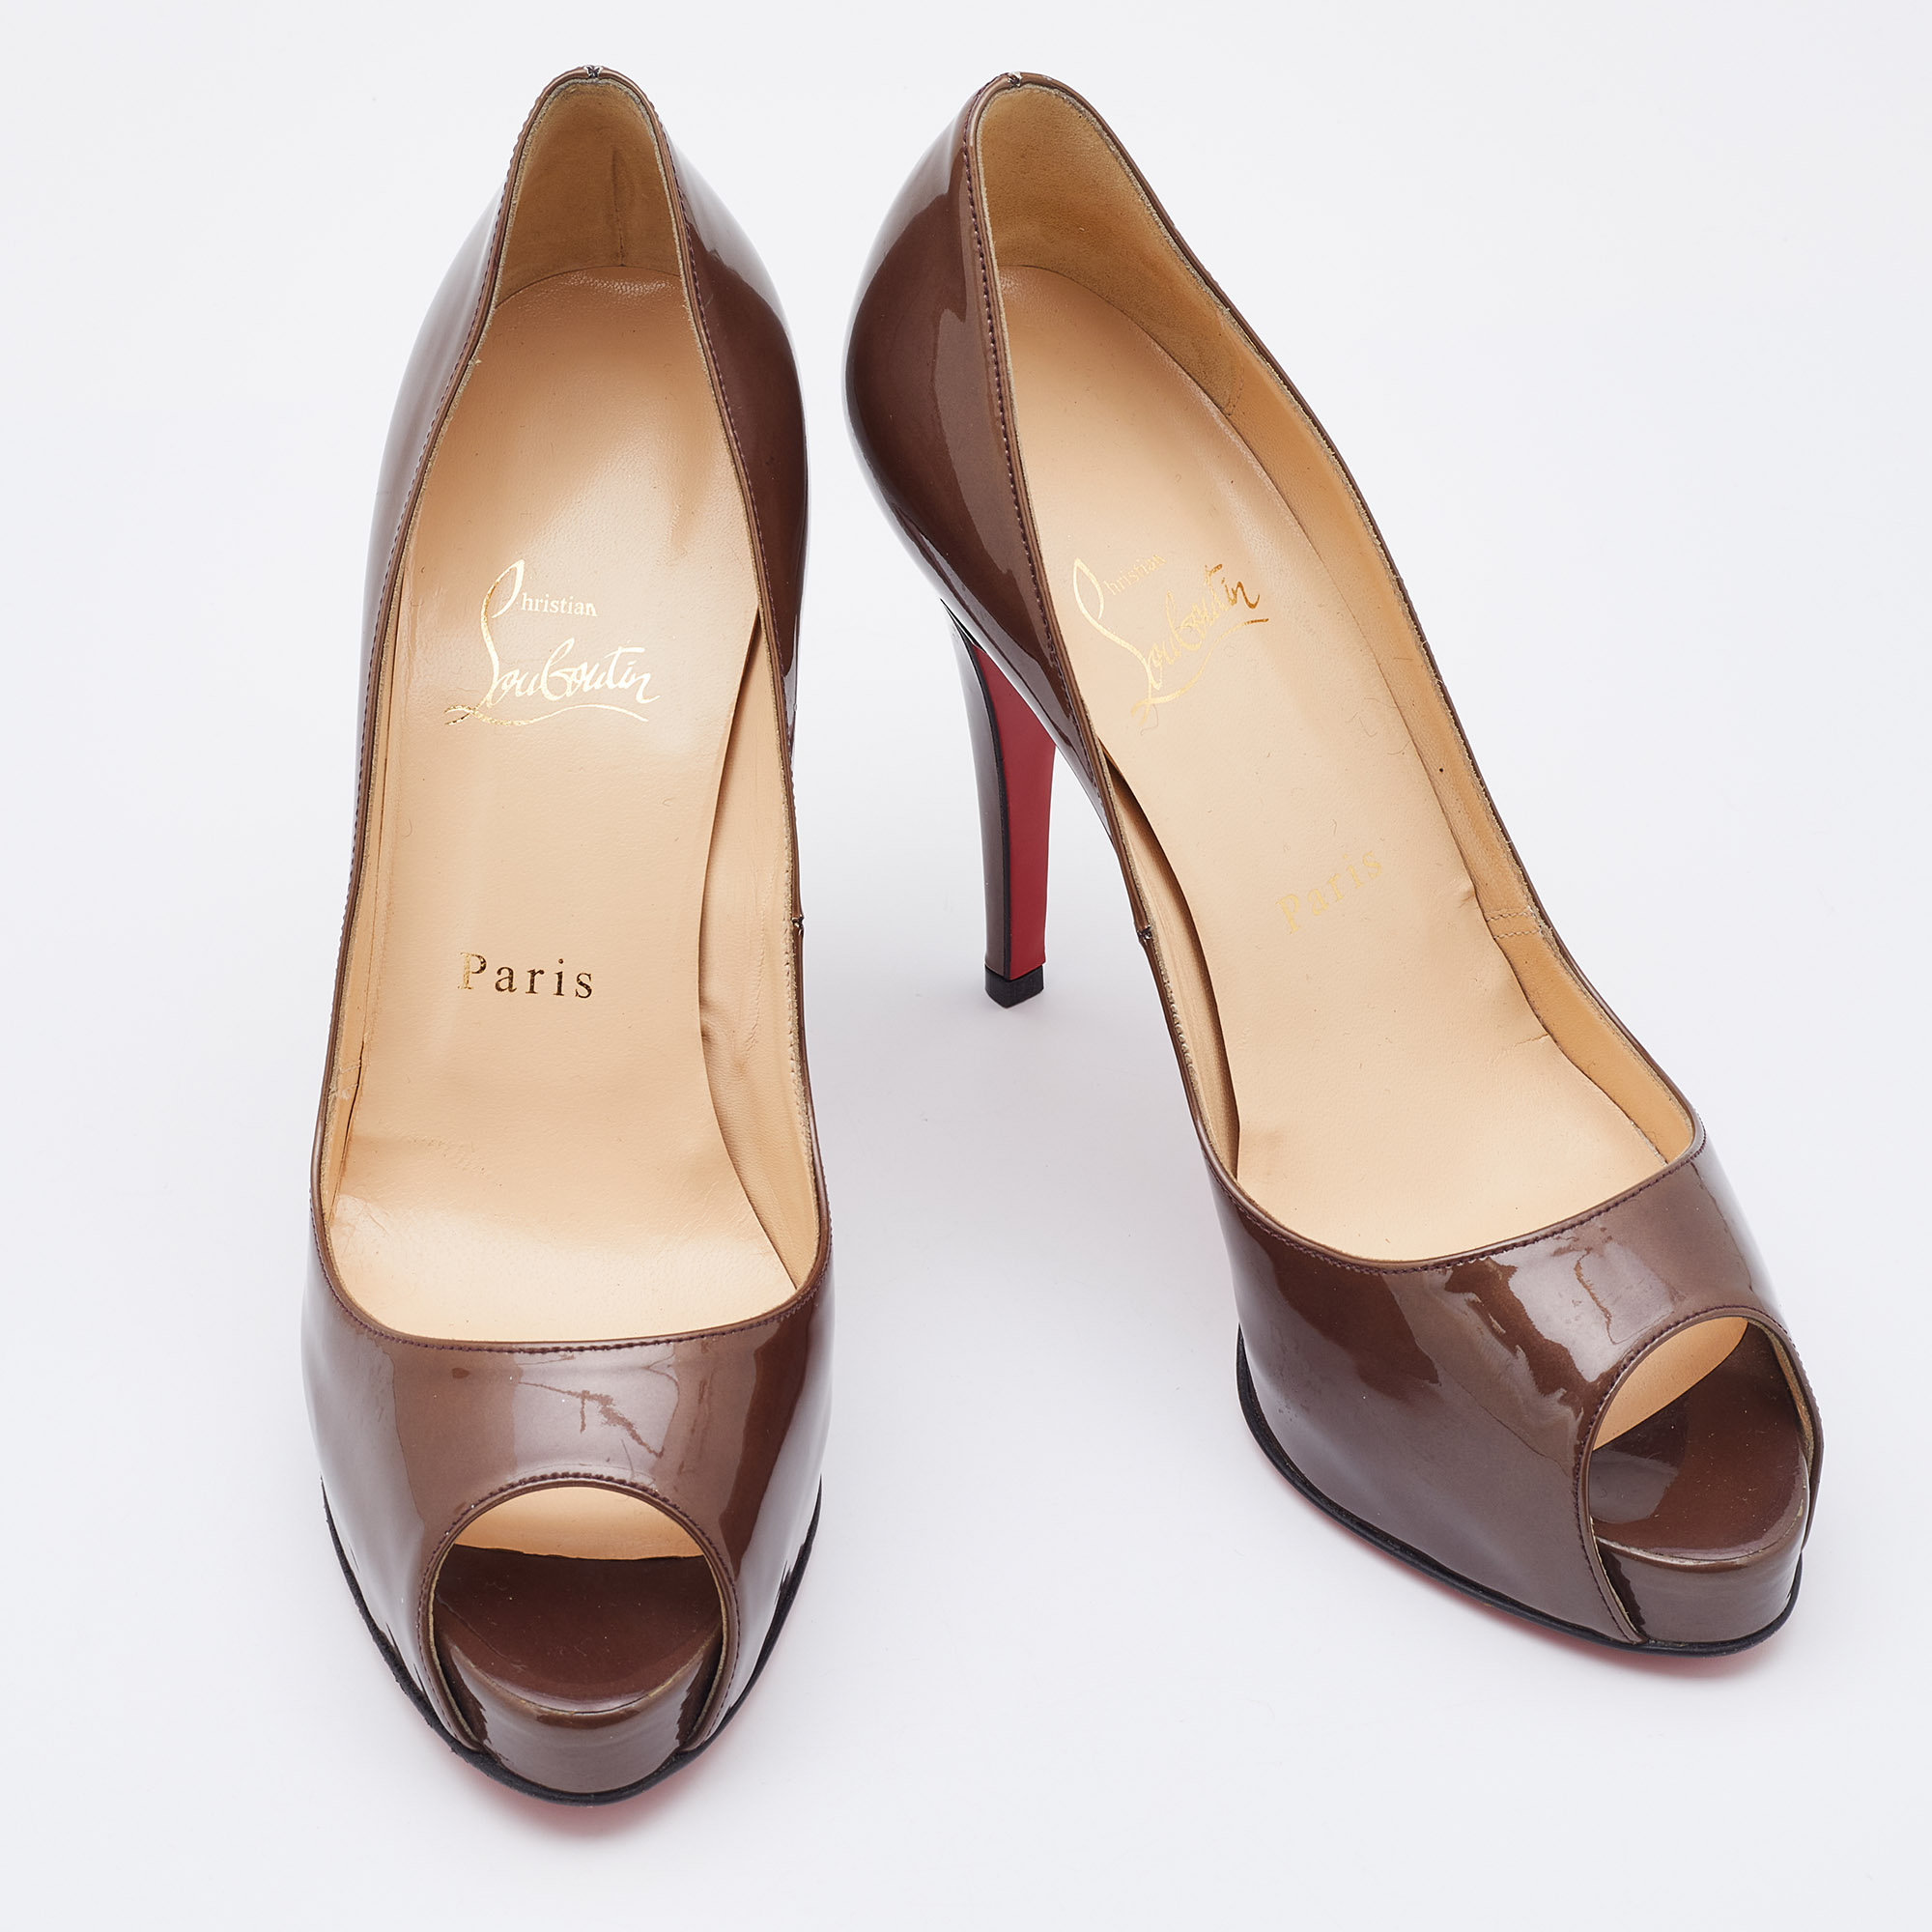 Christian Louboutin Brown Patent Leather New Very Prive Pumps Size 38.5